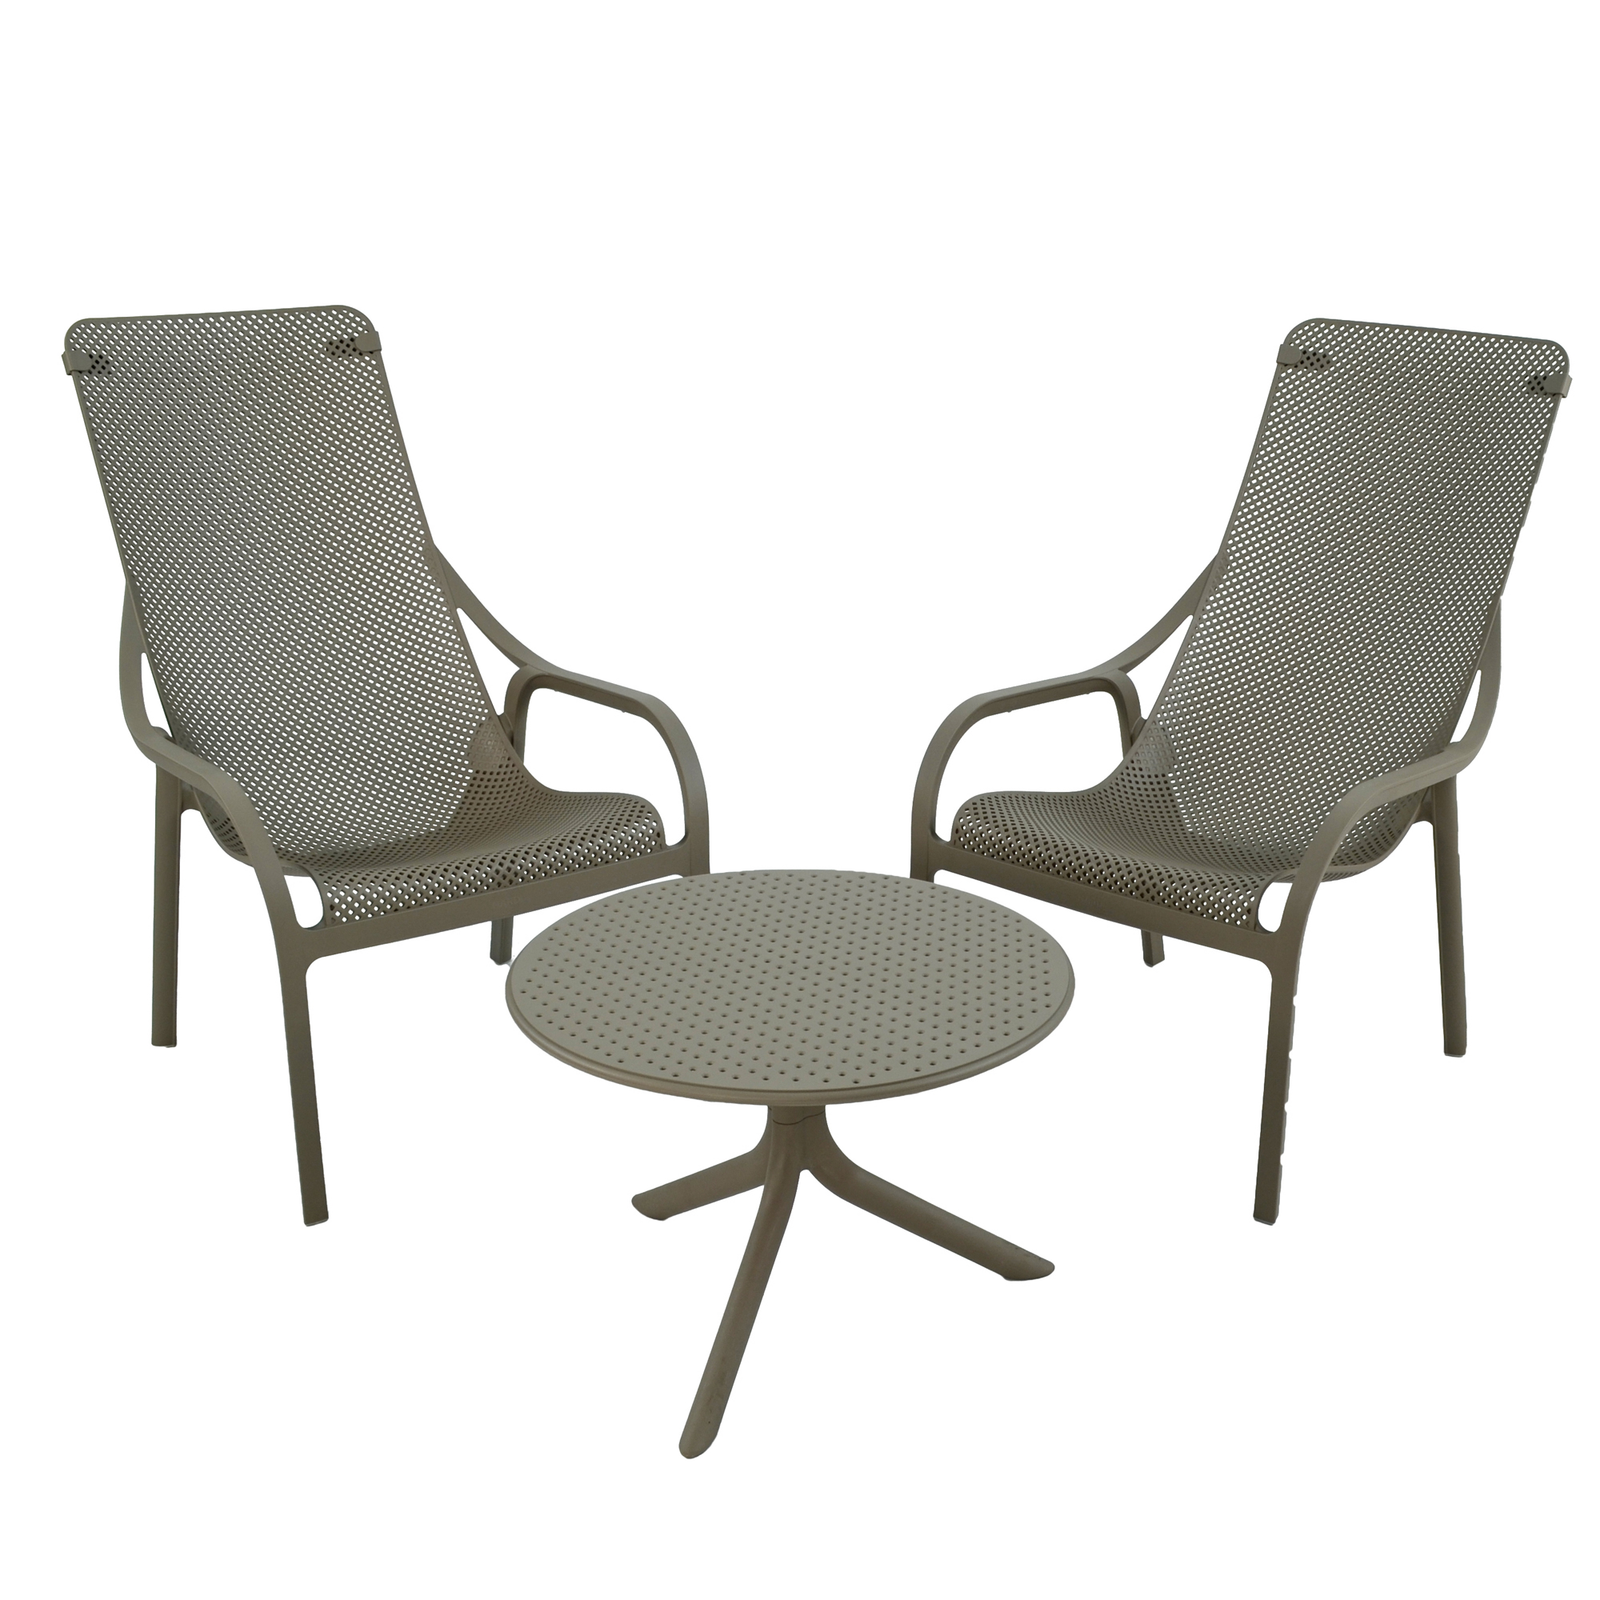 Nardi Step Low Garden Coffee Table With 2 Net Lounge Chair Set in Turtle Dove Grey Dining Sets Nardi   